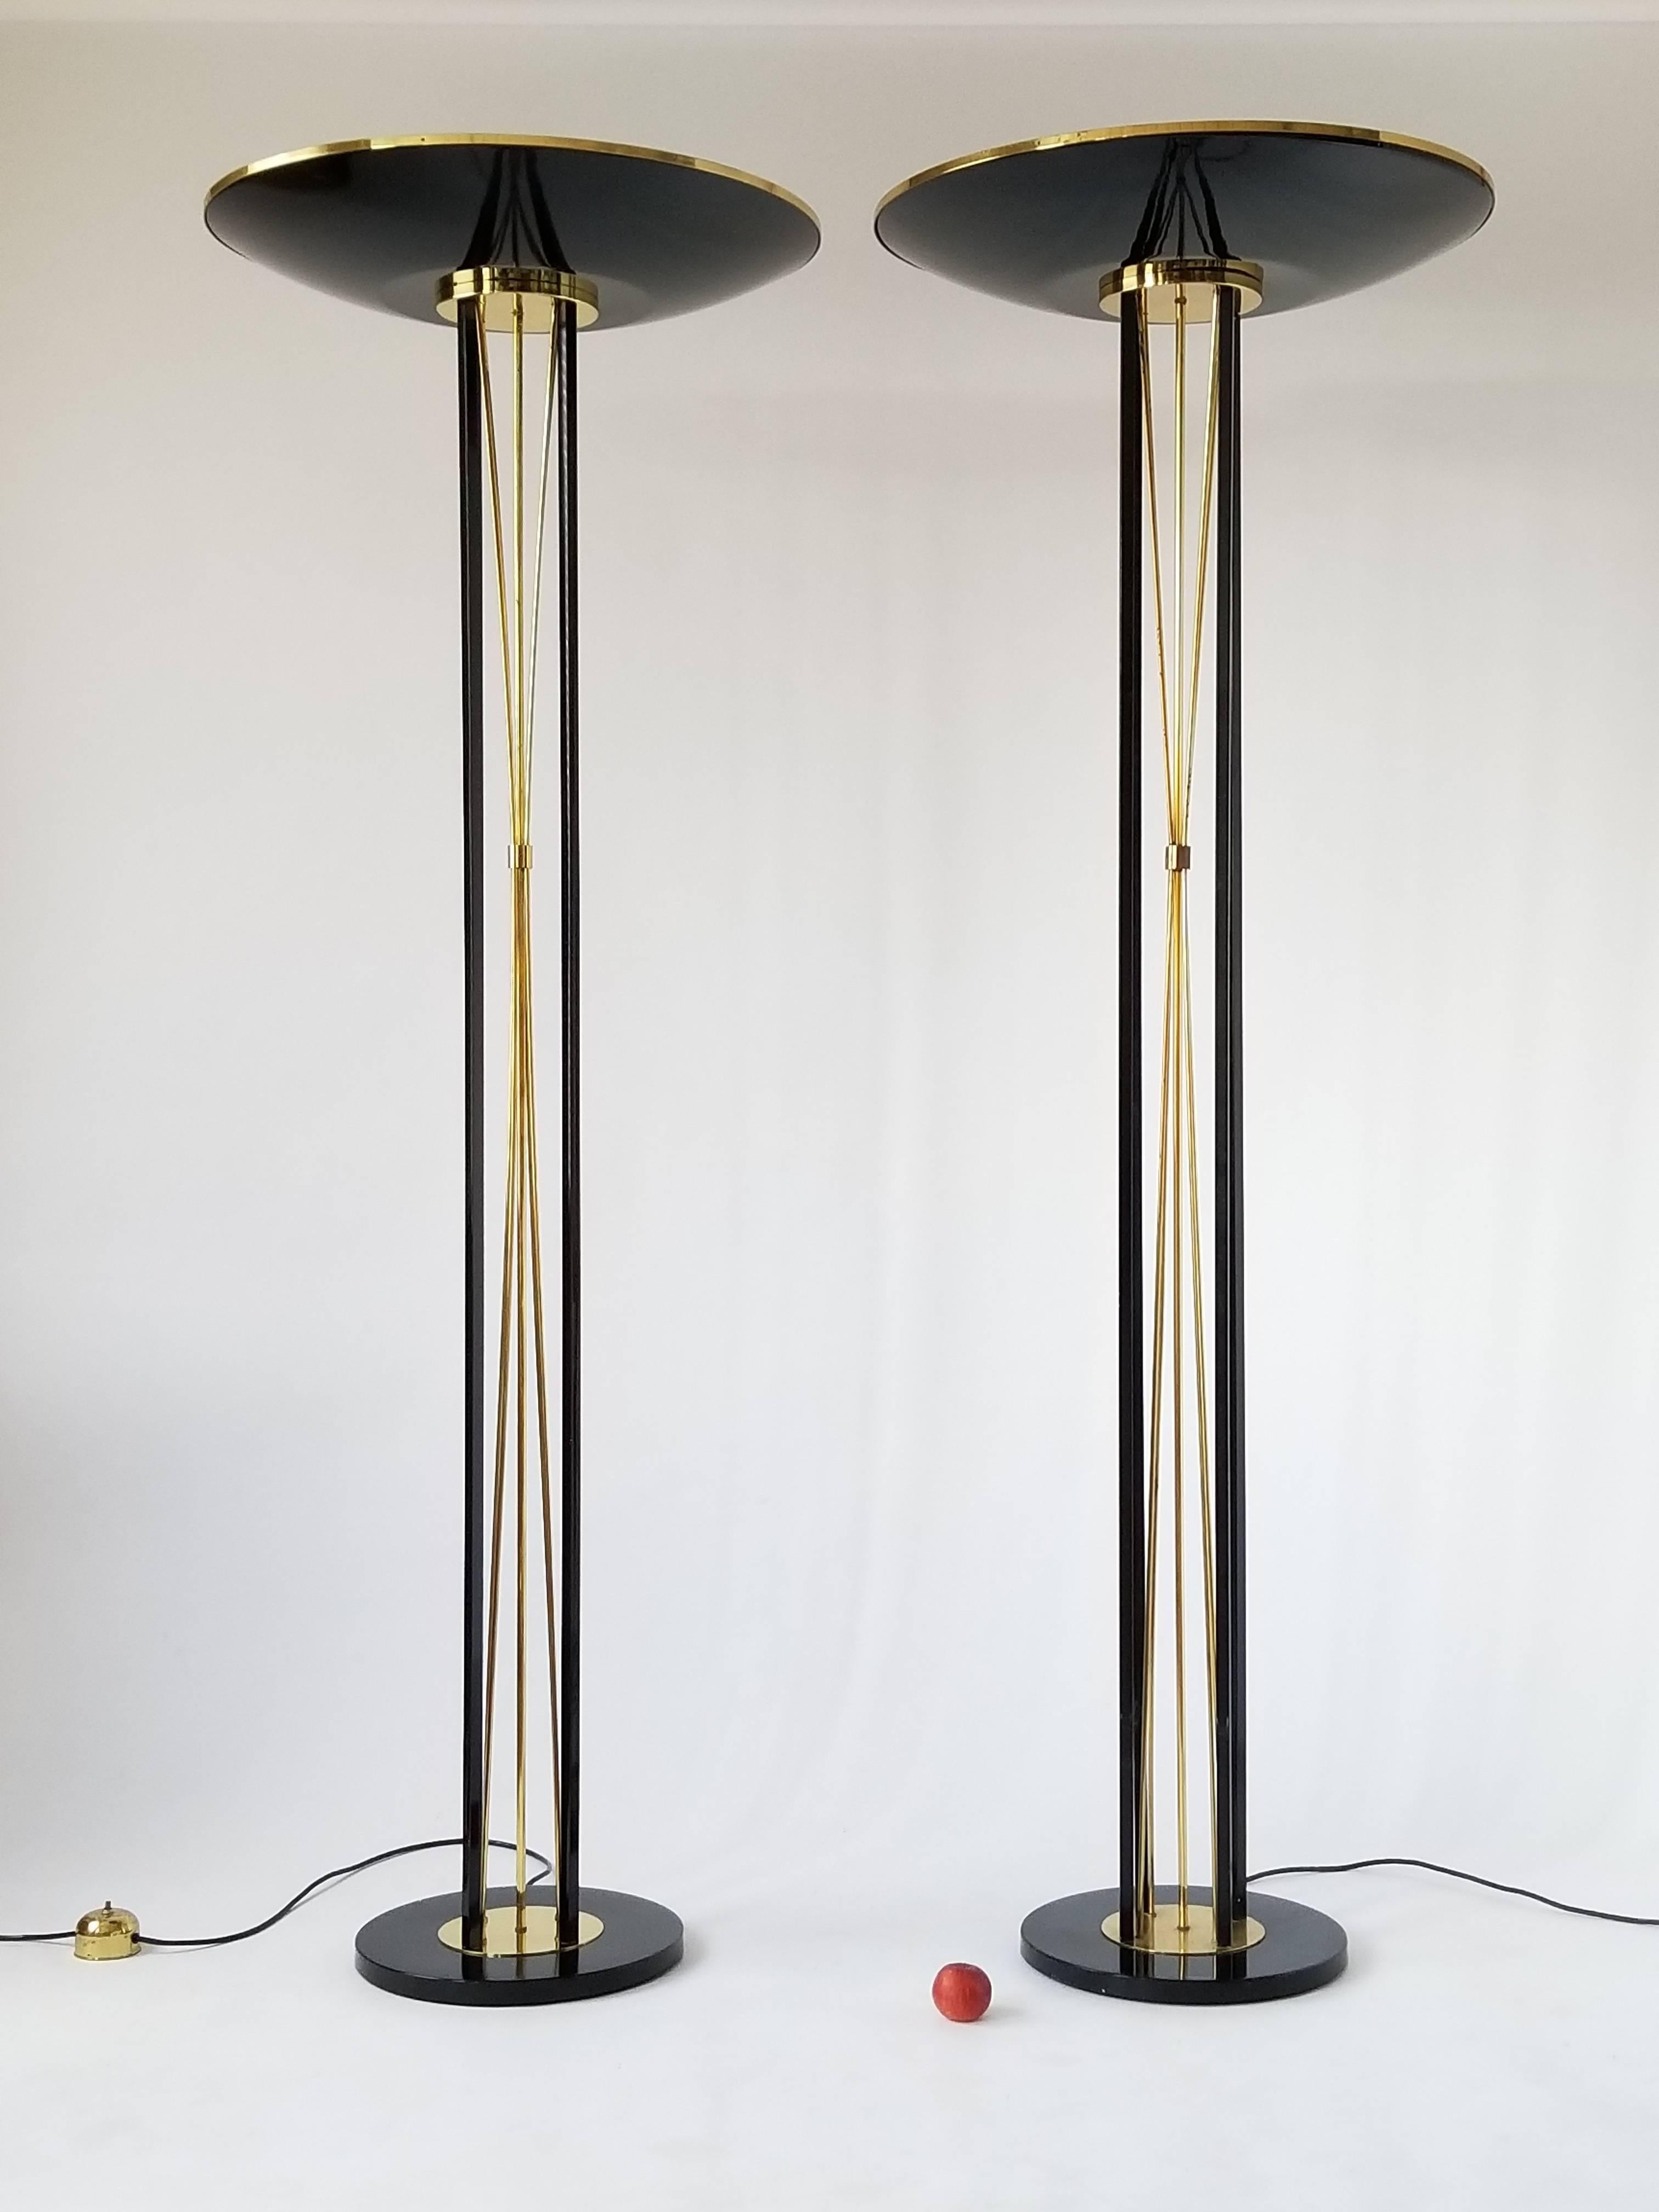 Minimalist Art Deco/ neoclassical   Reggiani torchiere. 

In a glossy enameled black steel with solid brass rods and trim.

Another  set of 2 is availaible in a light butter cream tone  .

Well made with prime quality material.

Measure 74.5 inches